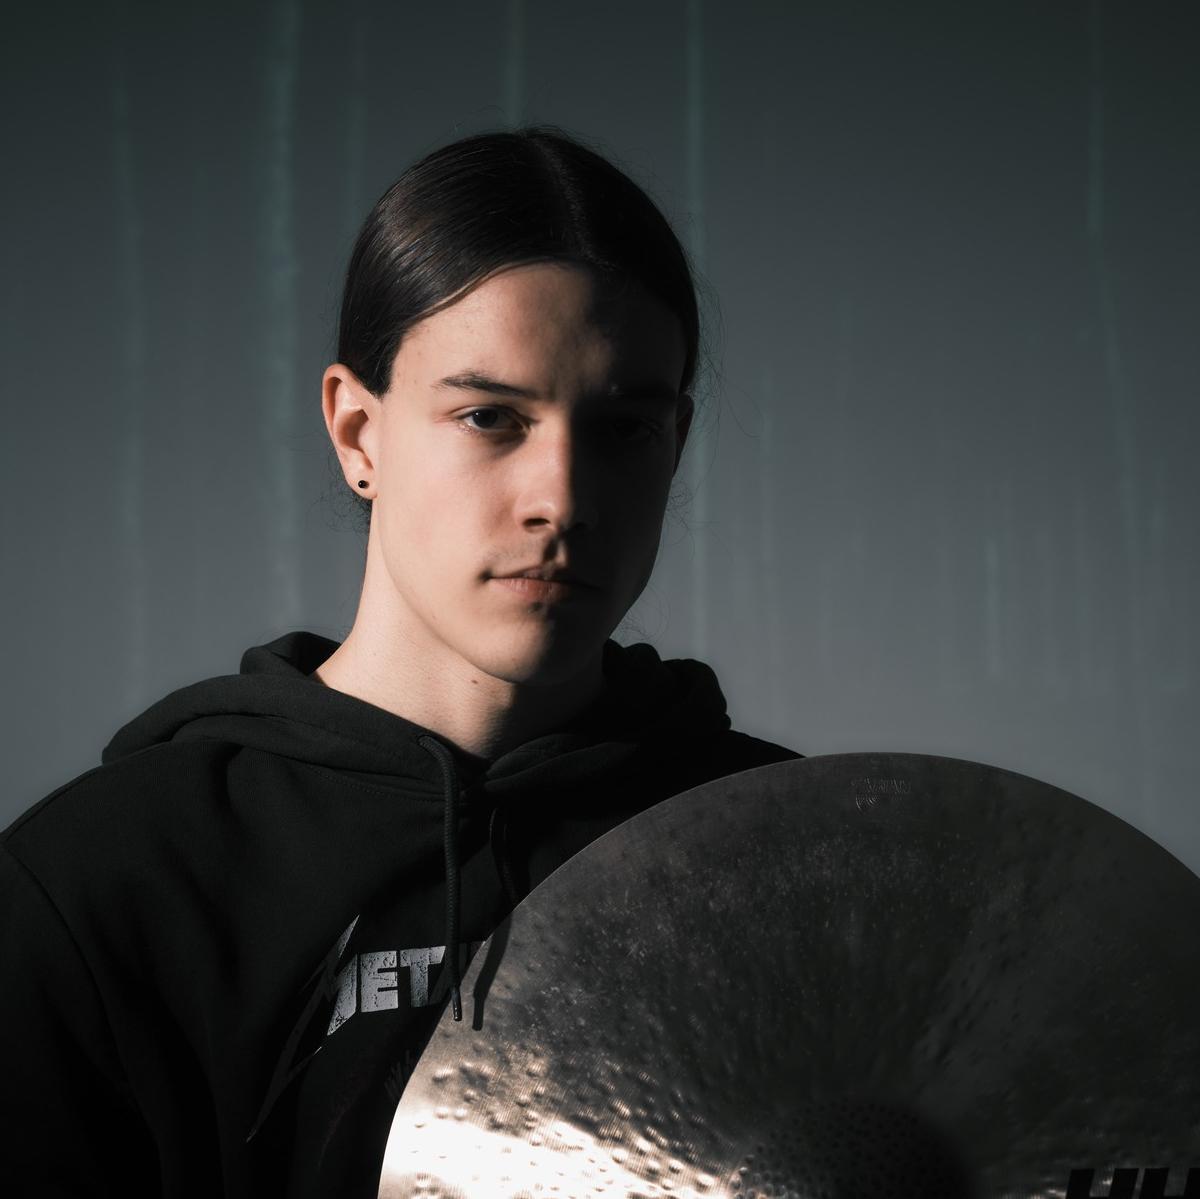 Drummer Timo